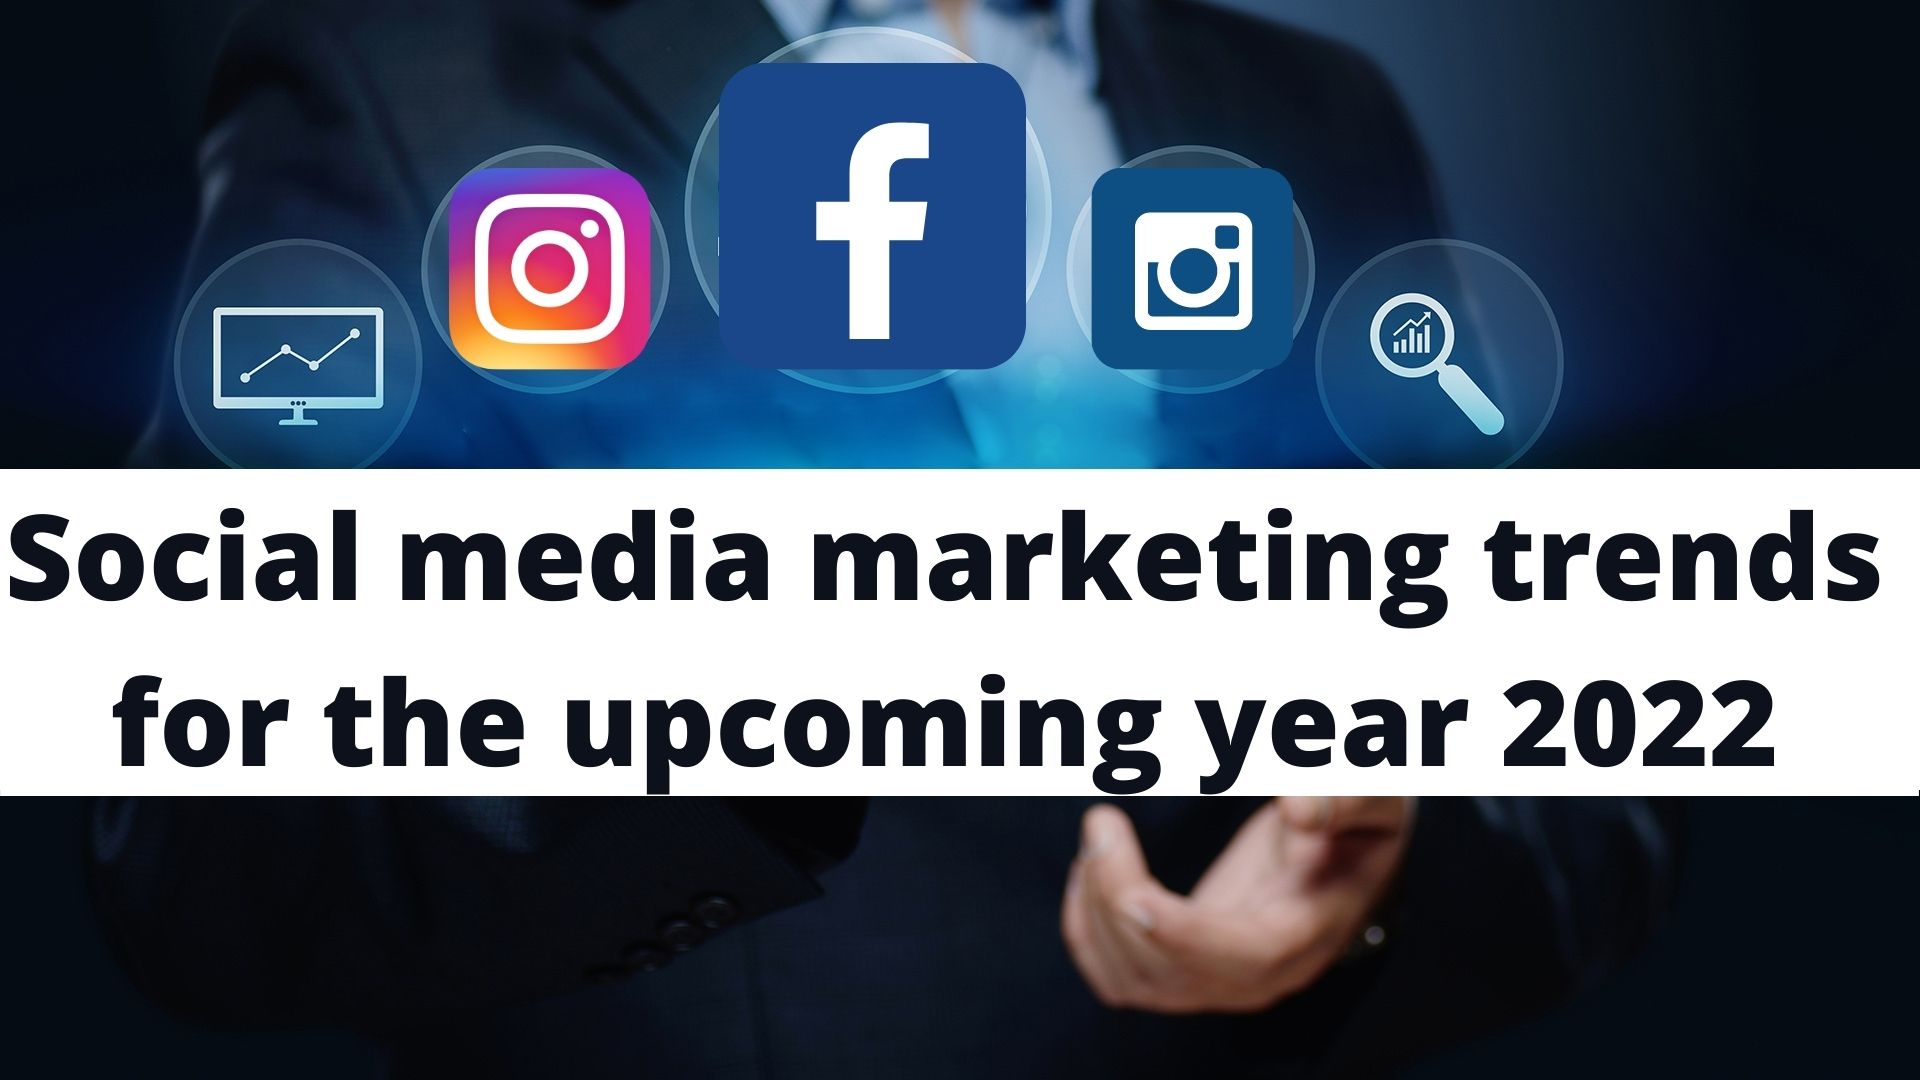 Social media marketing trends for the upcoming year 2022